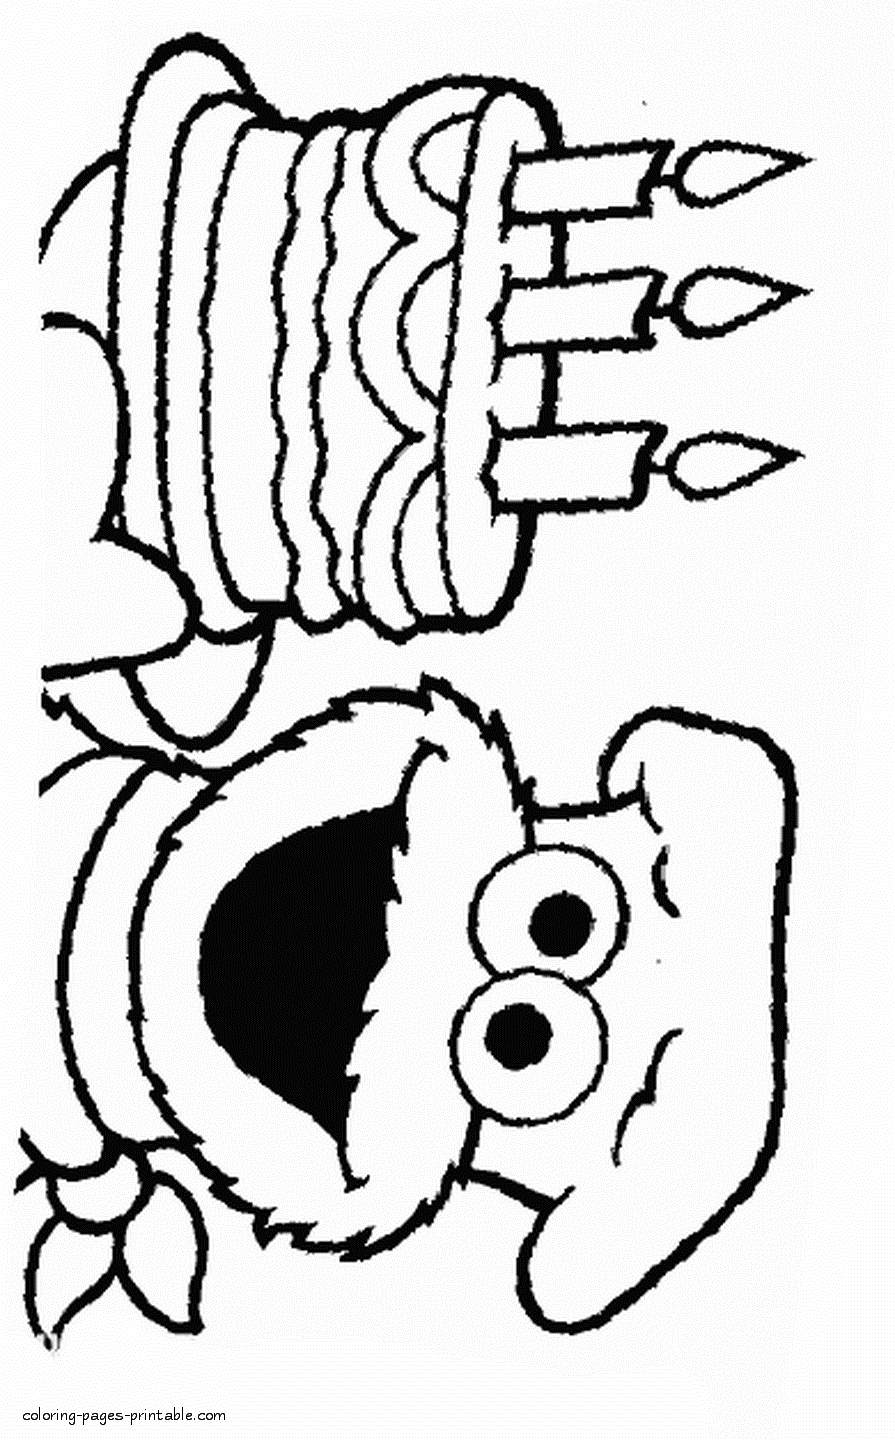 Cookie Monster Pictures Cookie Monster Coloring Pages